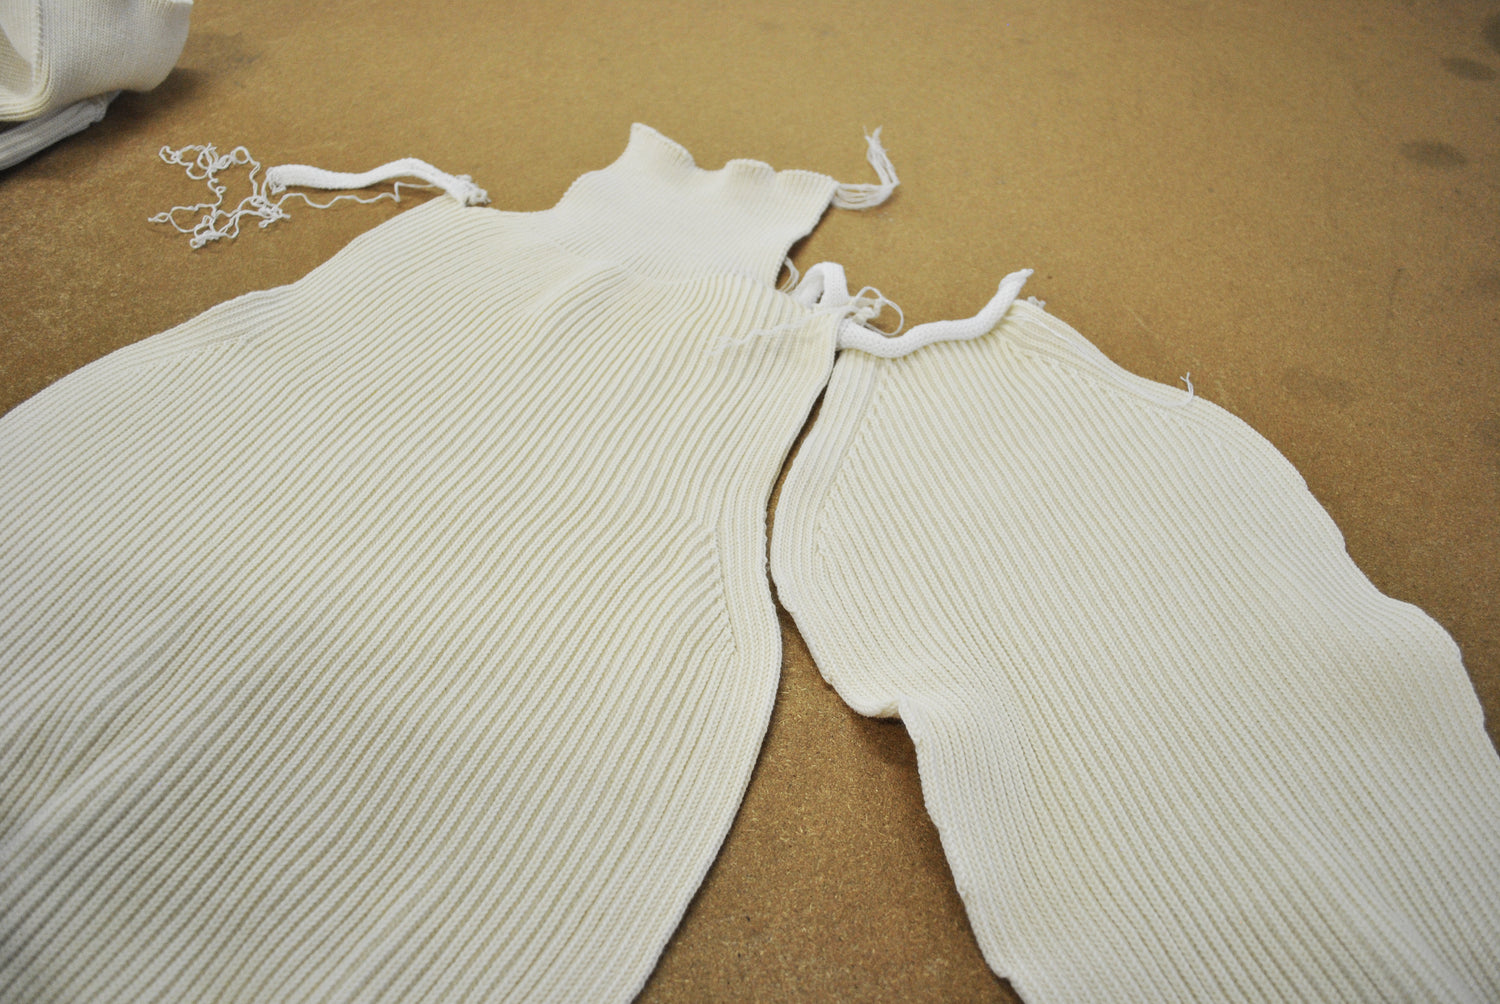 Fully fashioned parts of Navy Turtleneck ready to be linked